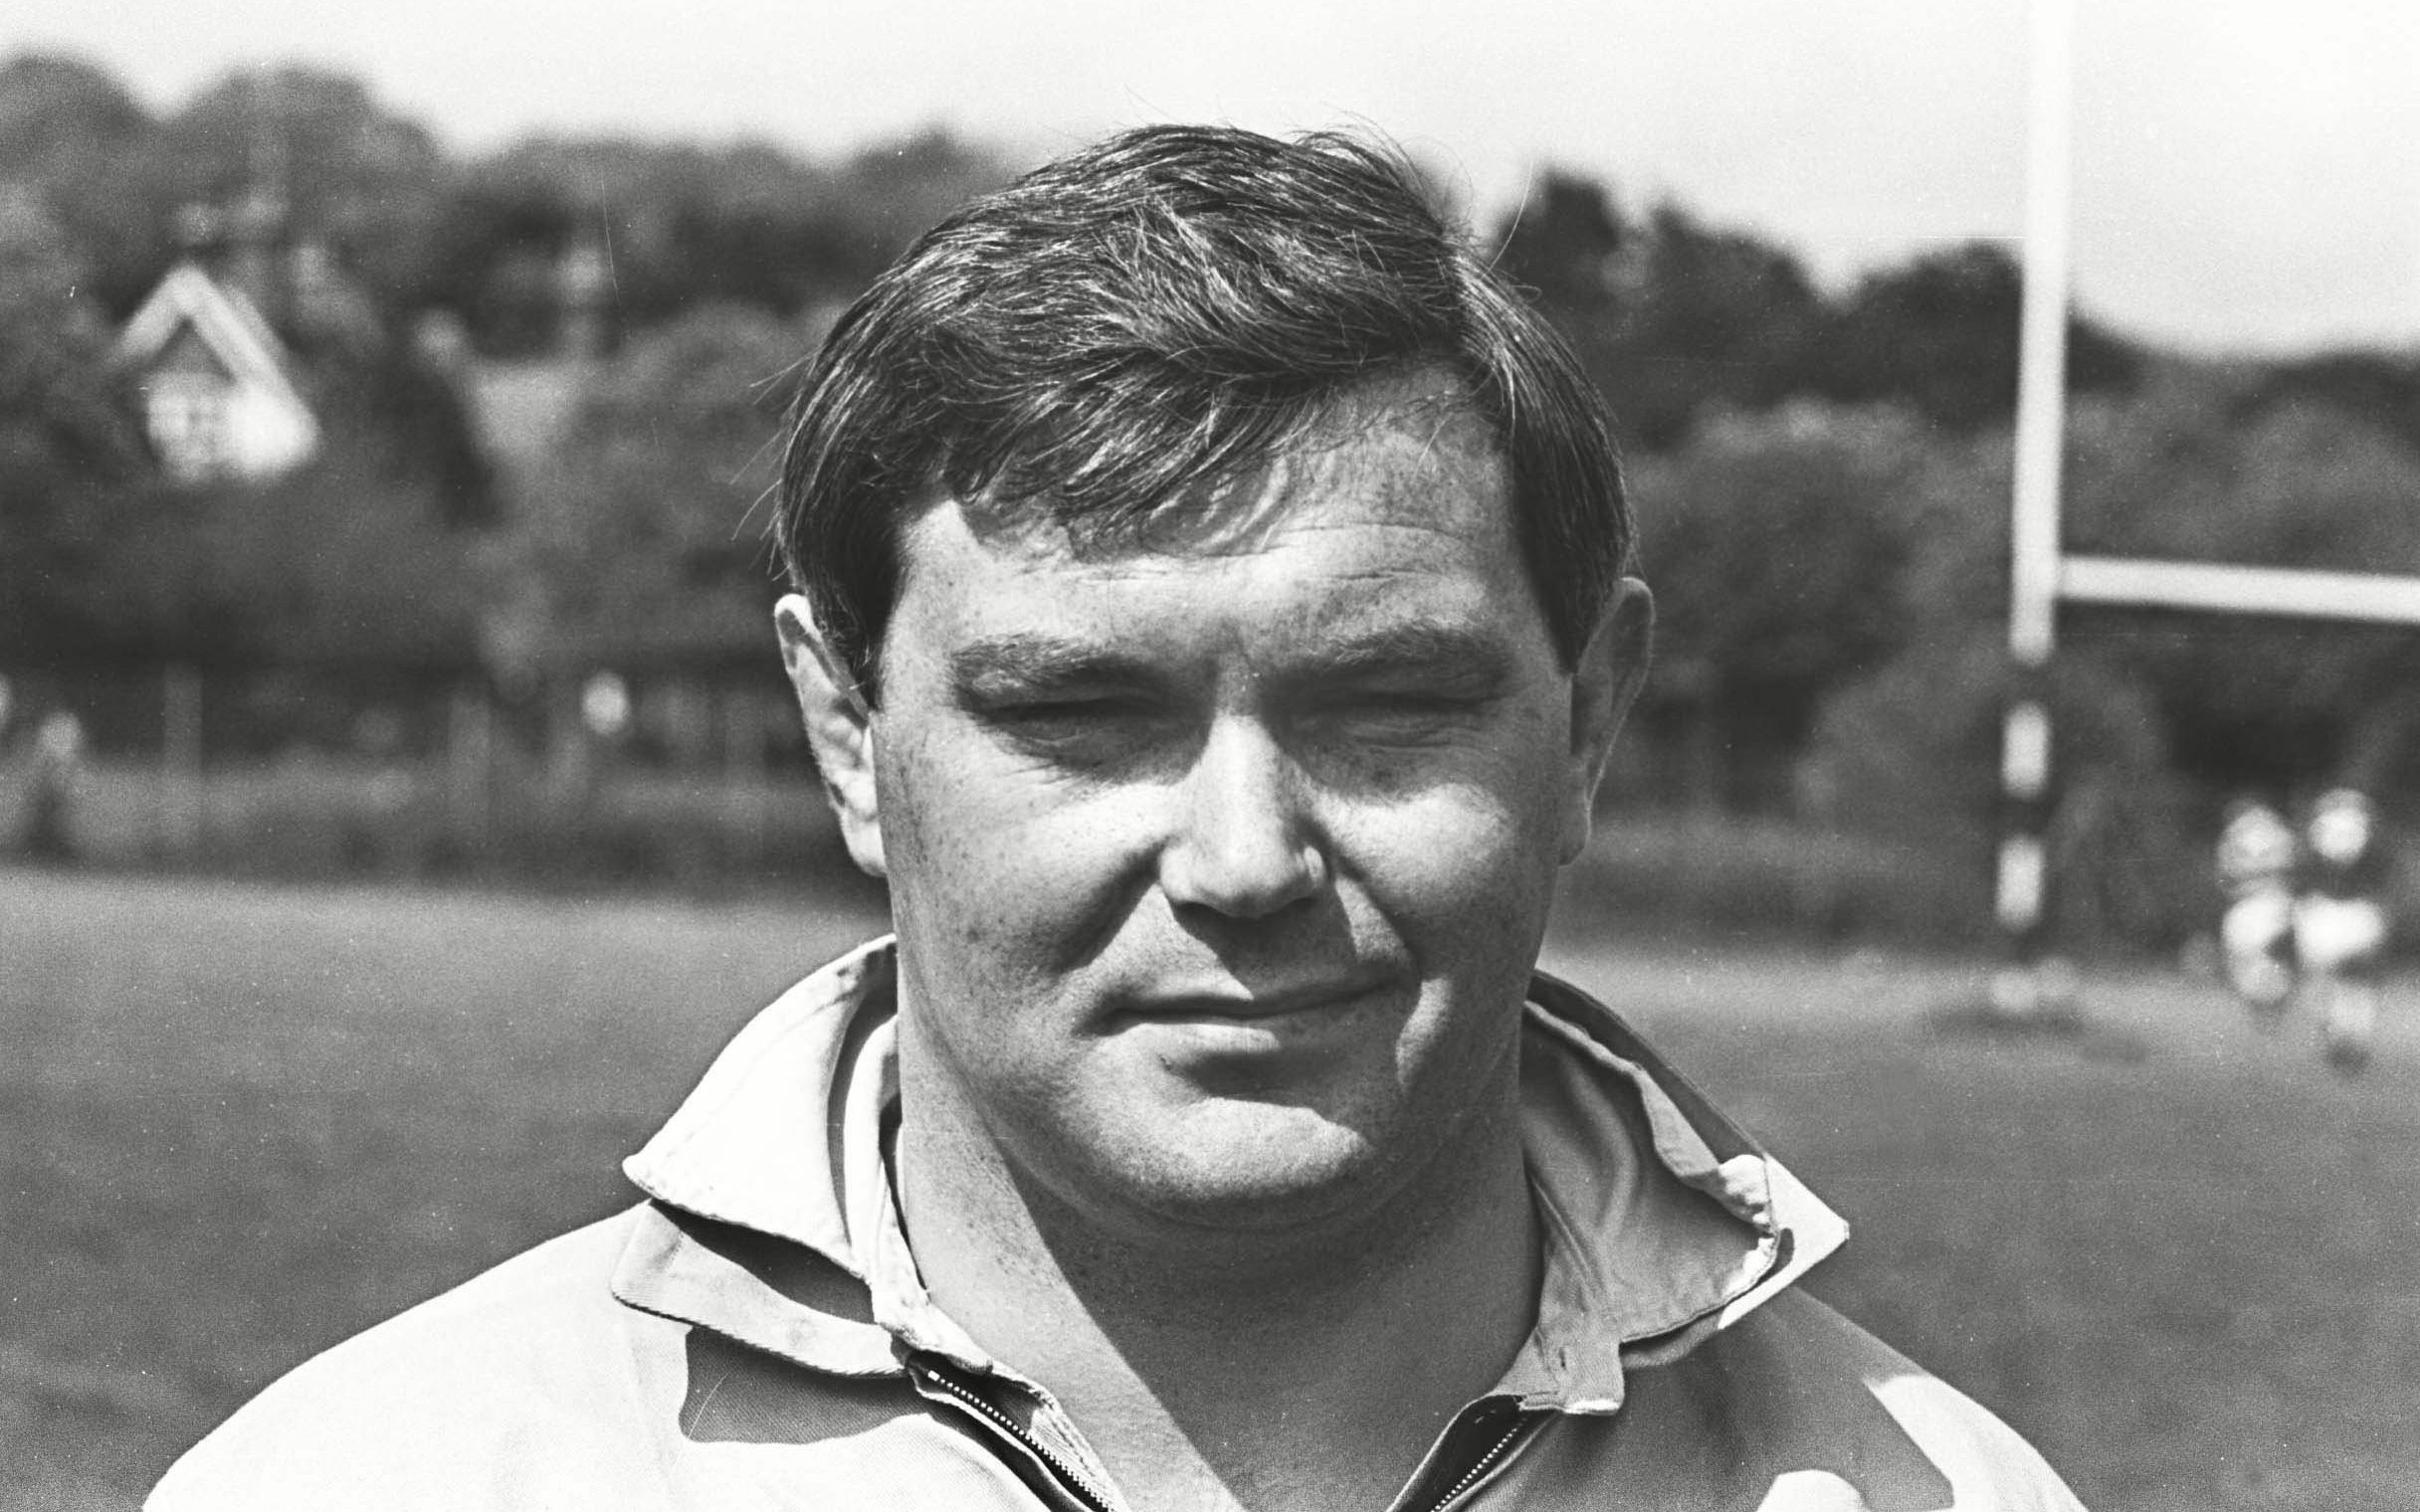 john o’shea, welsh rugby prop who became the first lion to be sent off for foul play – obituary